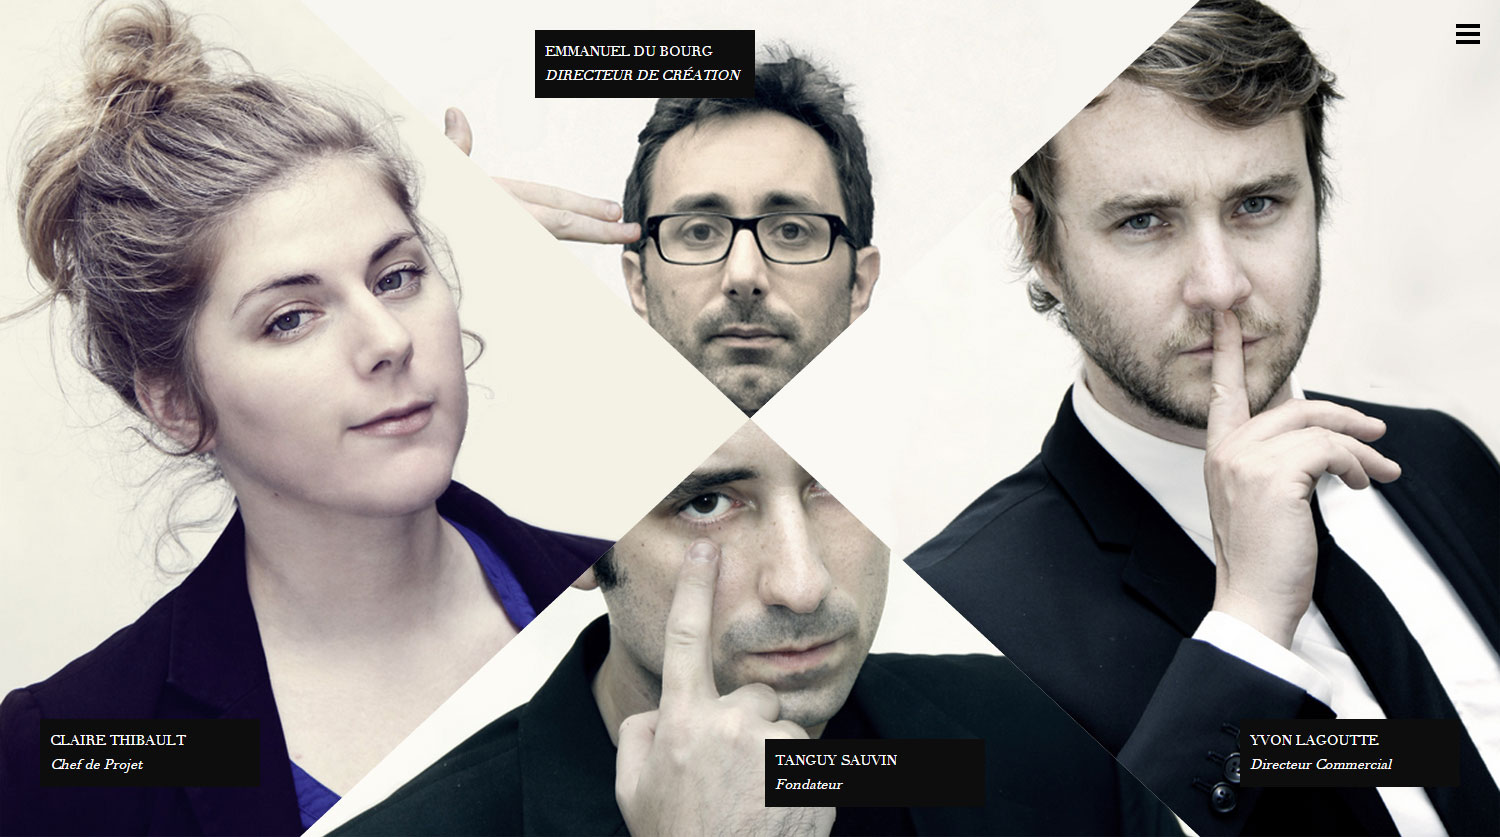 Les Impertinents - Website of the Day